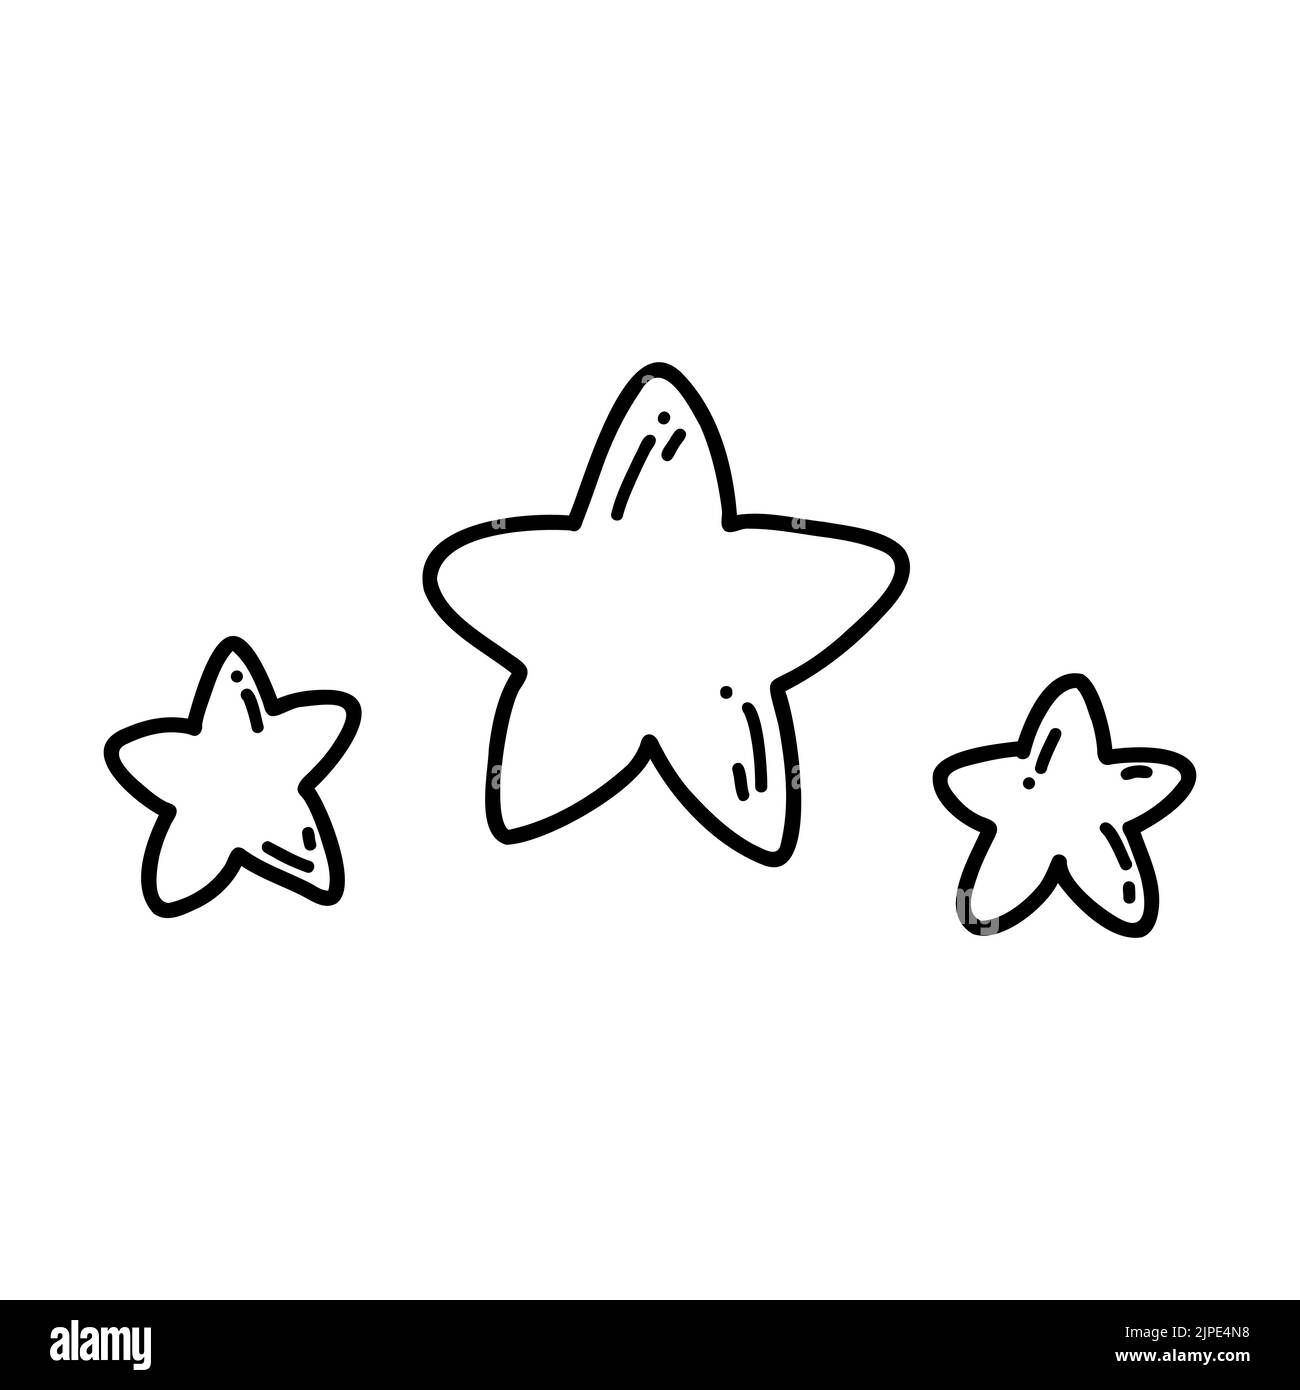 Hand drawn doodle set of stars icon. Vector sketch illustration of black outline celestial body, starfish for print, coloring page, kids design, logo Stock Vector